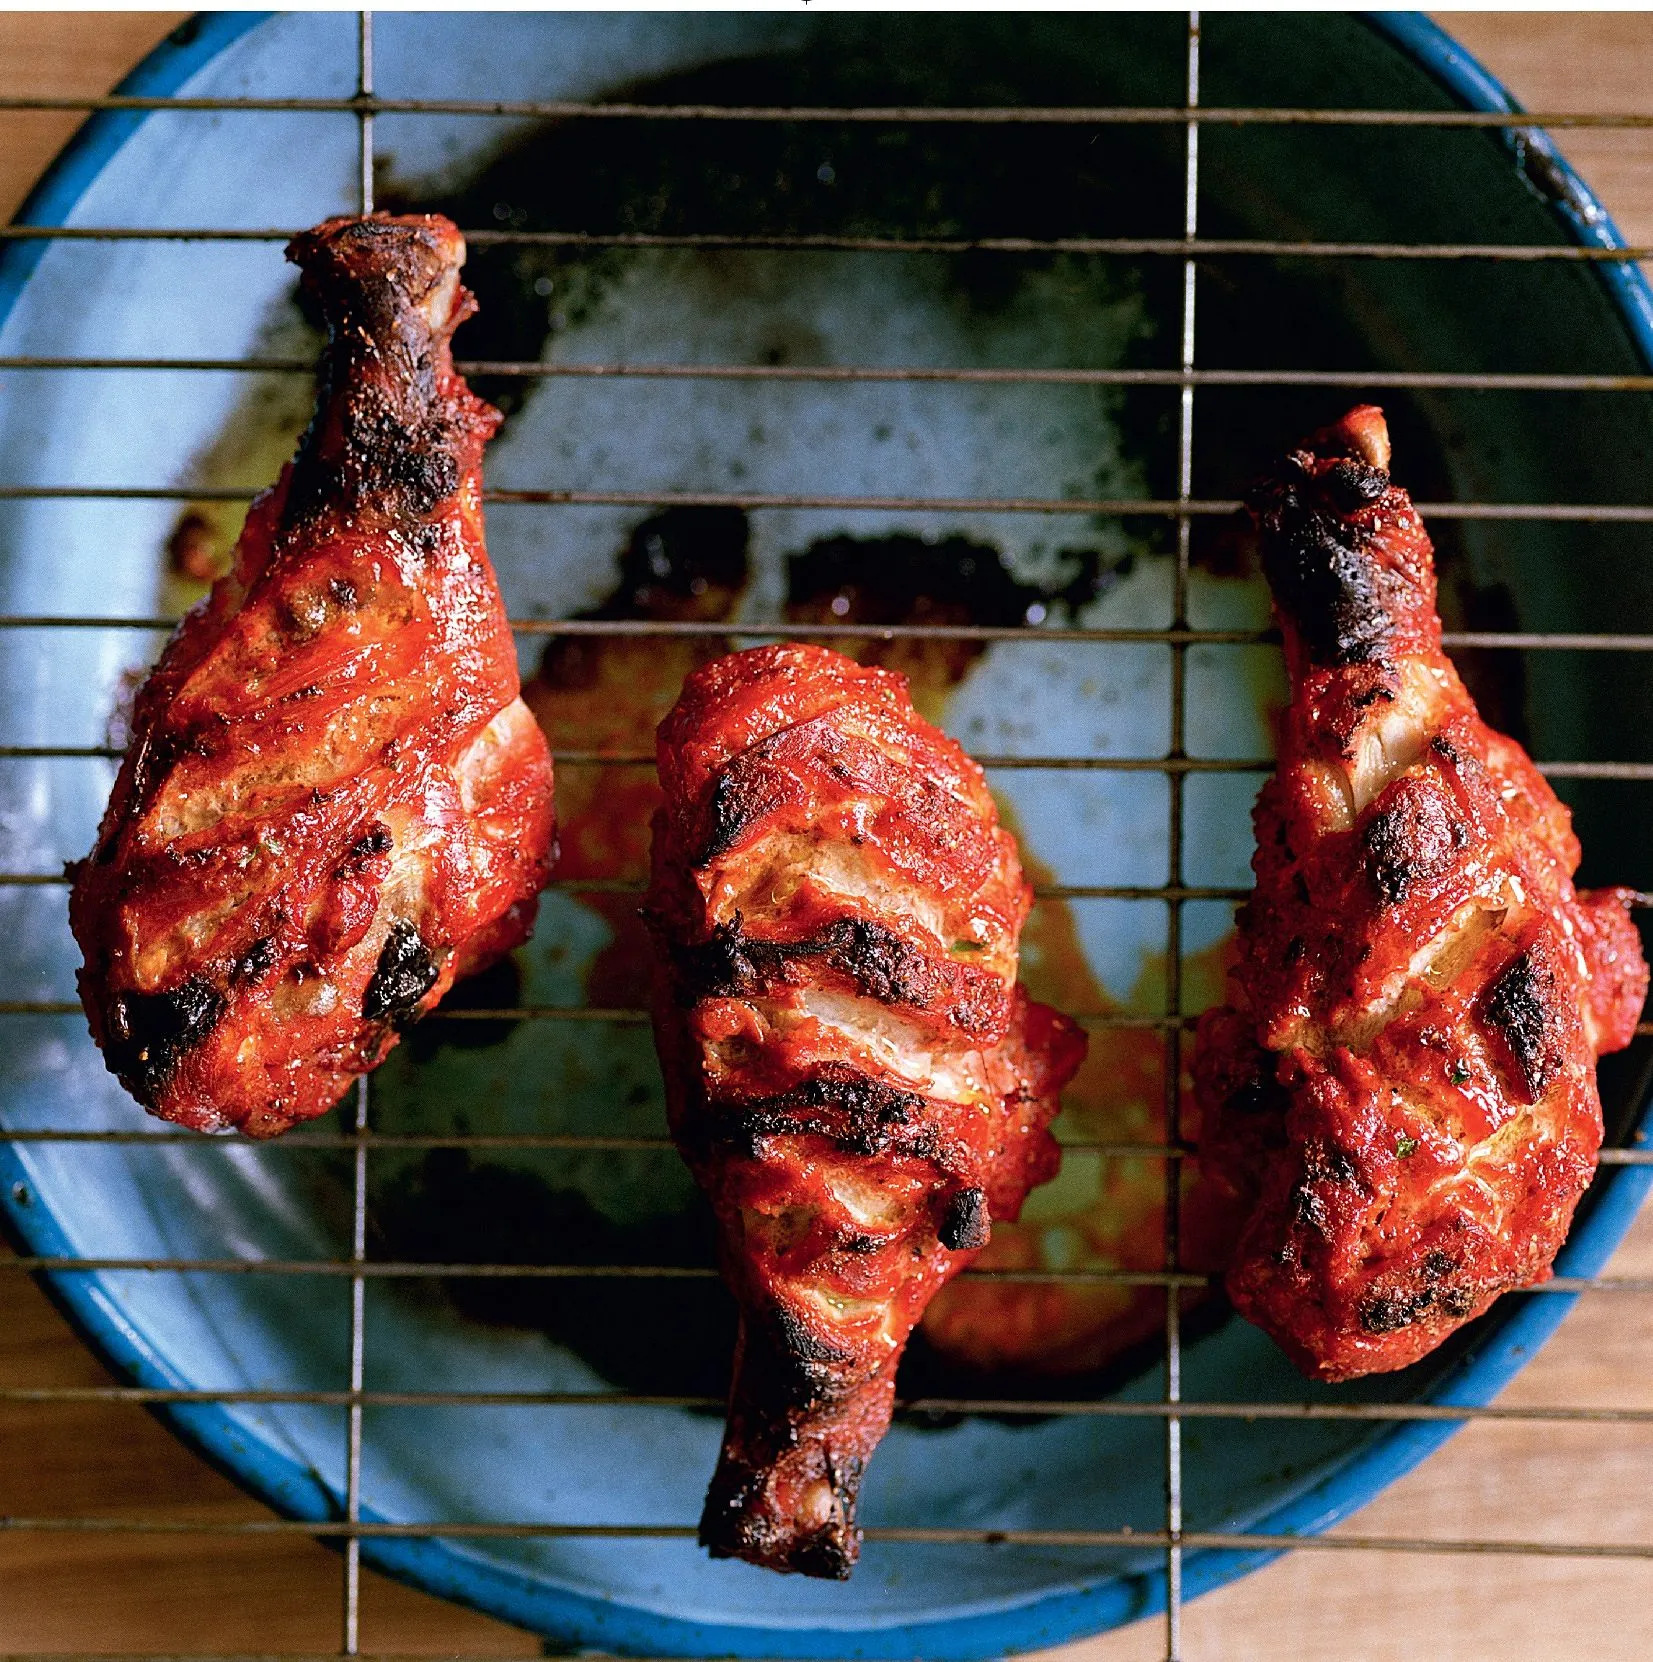 Close-up of marinated tandoori chicken skewers cooking in a traditional tandoor oven, highlighting the charred, smoky exterior.